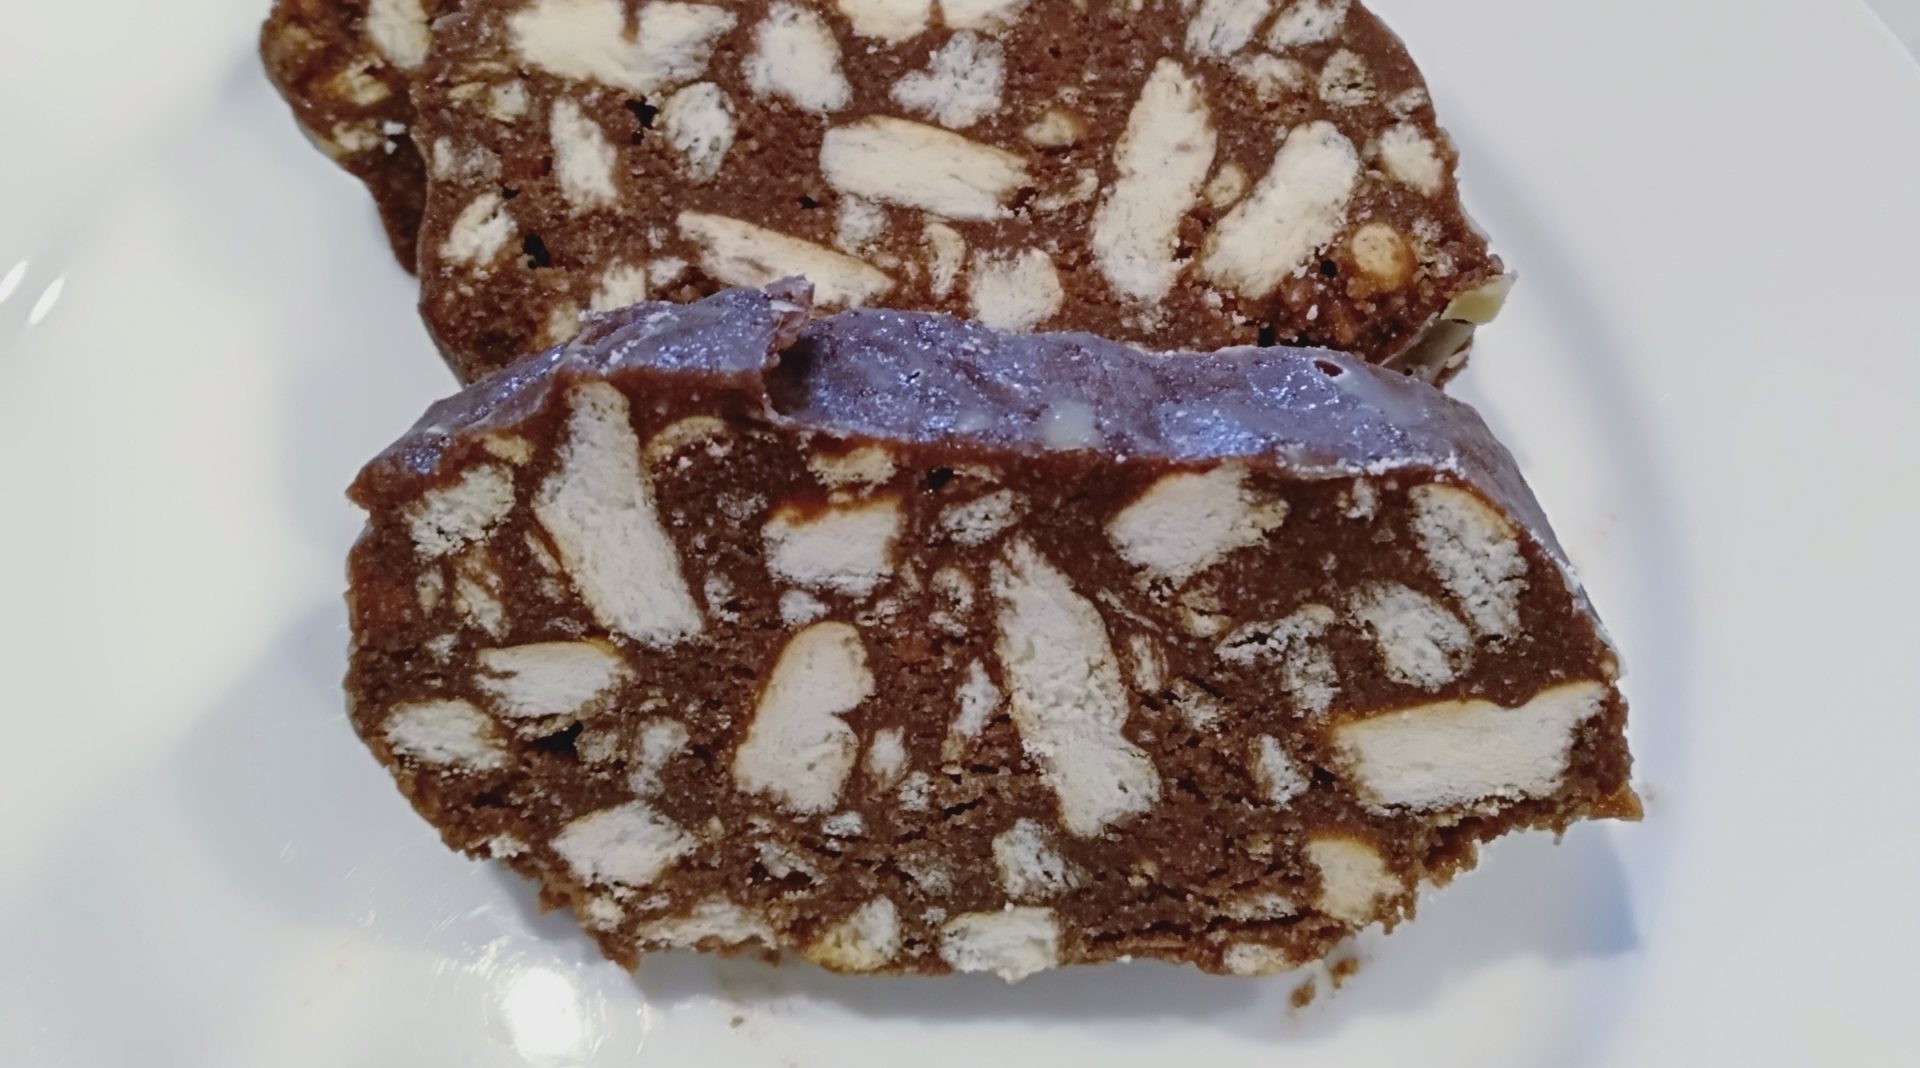 Chocolate salami, an easy-peasy delicacy